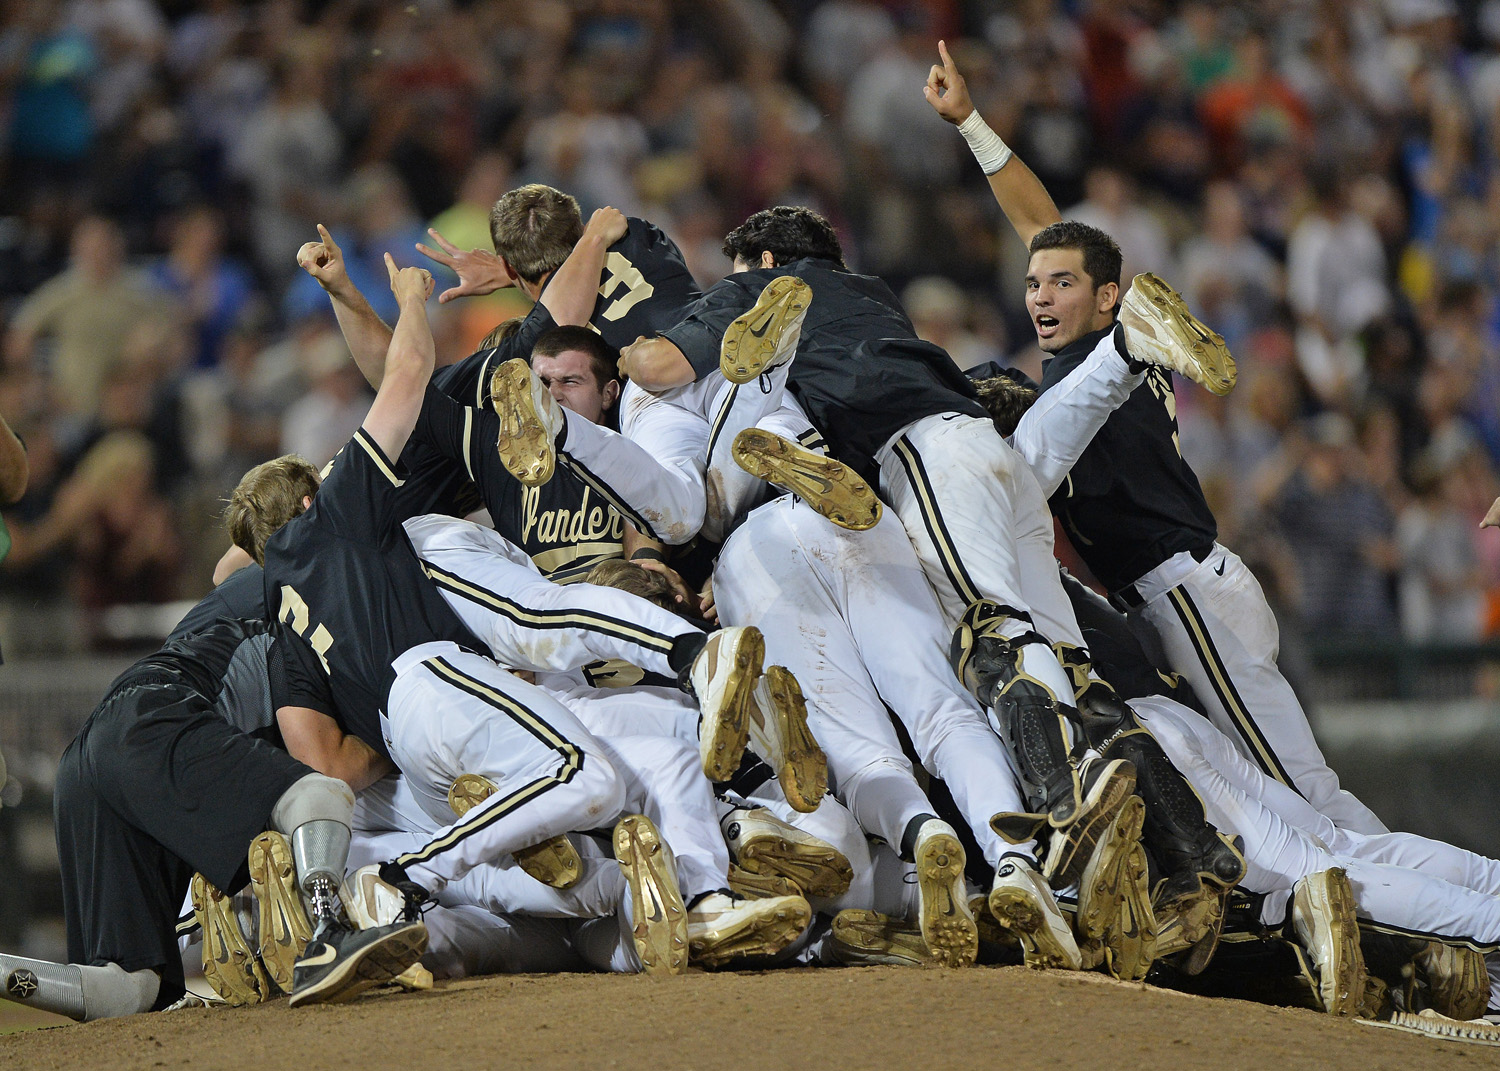 The Vanderbilt Commodores players celebrate after beating the Virginia Cavaliers 3-2 to win the College World Series Championship  at TD Ameritrade Park in Omaha on June 25, 2014.